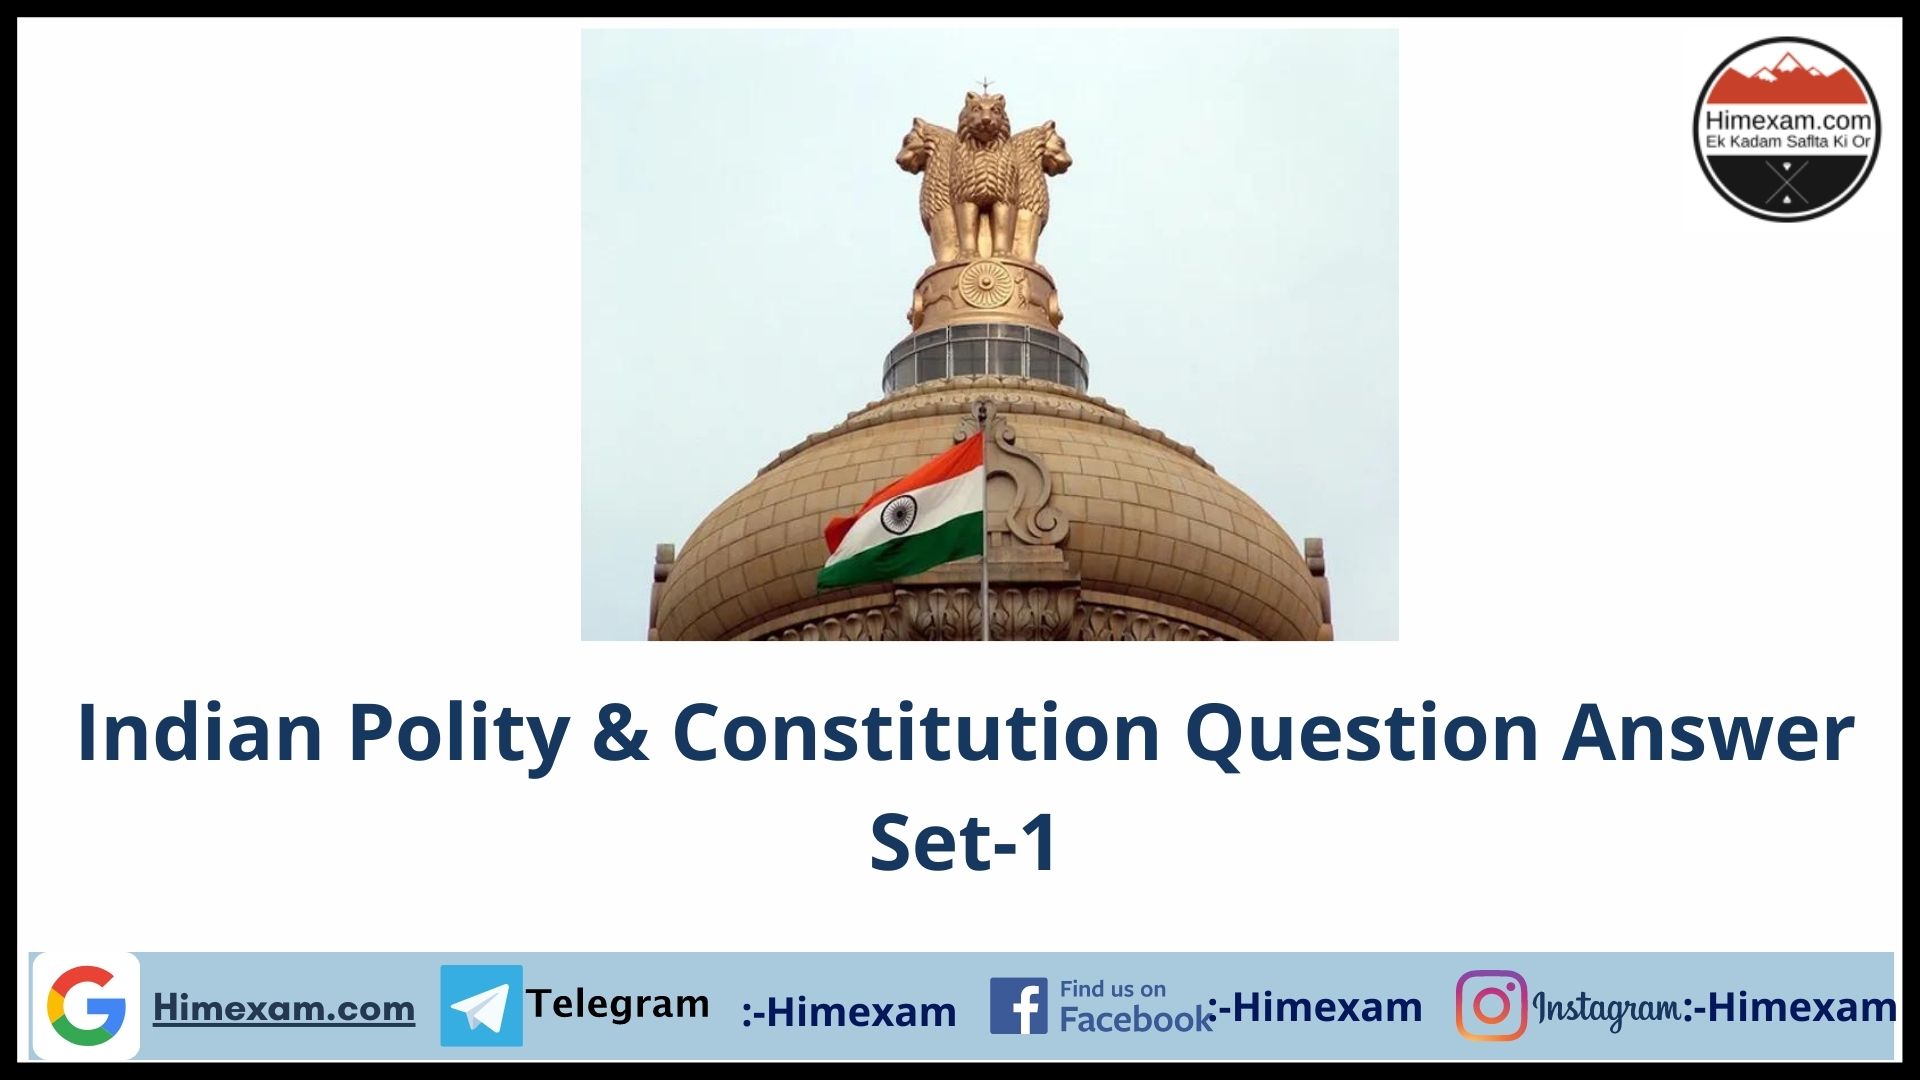 Indian Polity & Constitution Question Answer Set-1